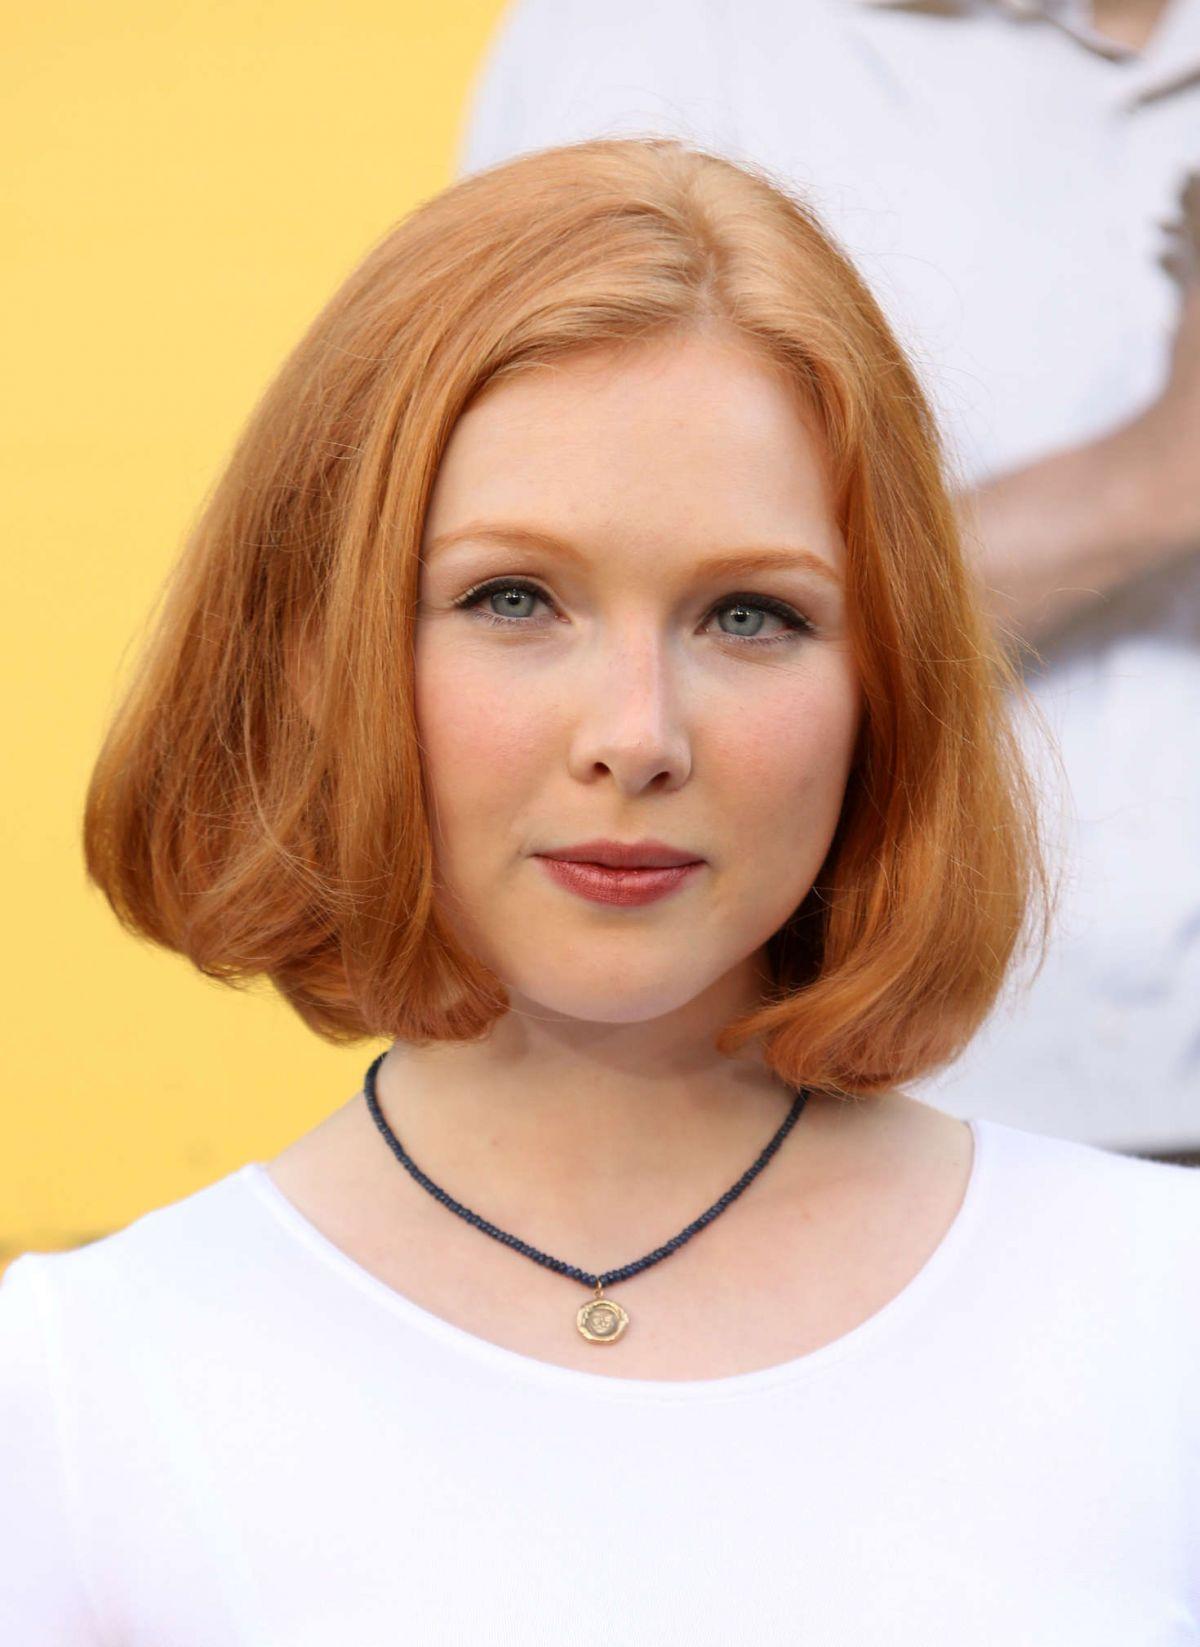 70+ Hot Pictures Of Molly C. Quinn Are God’s Gift For Her Die Hard Fans 108